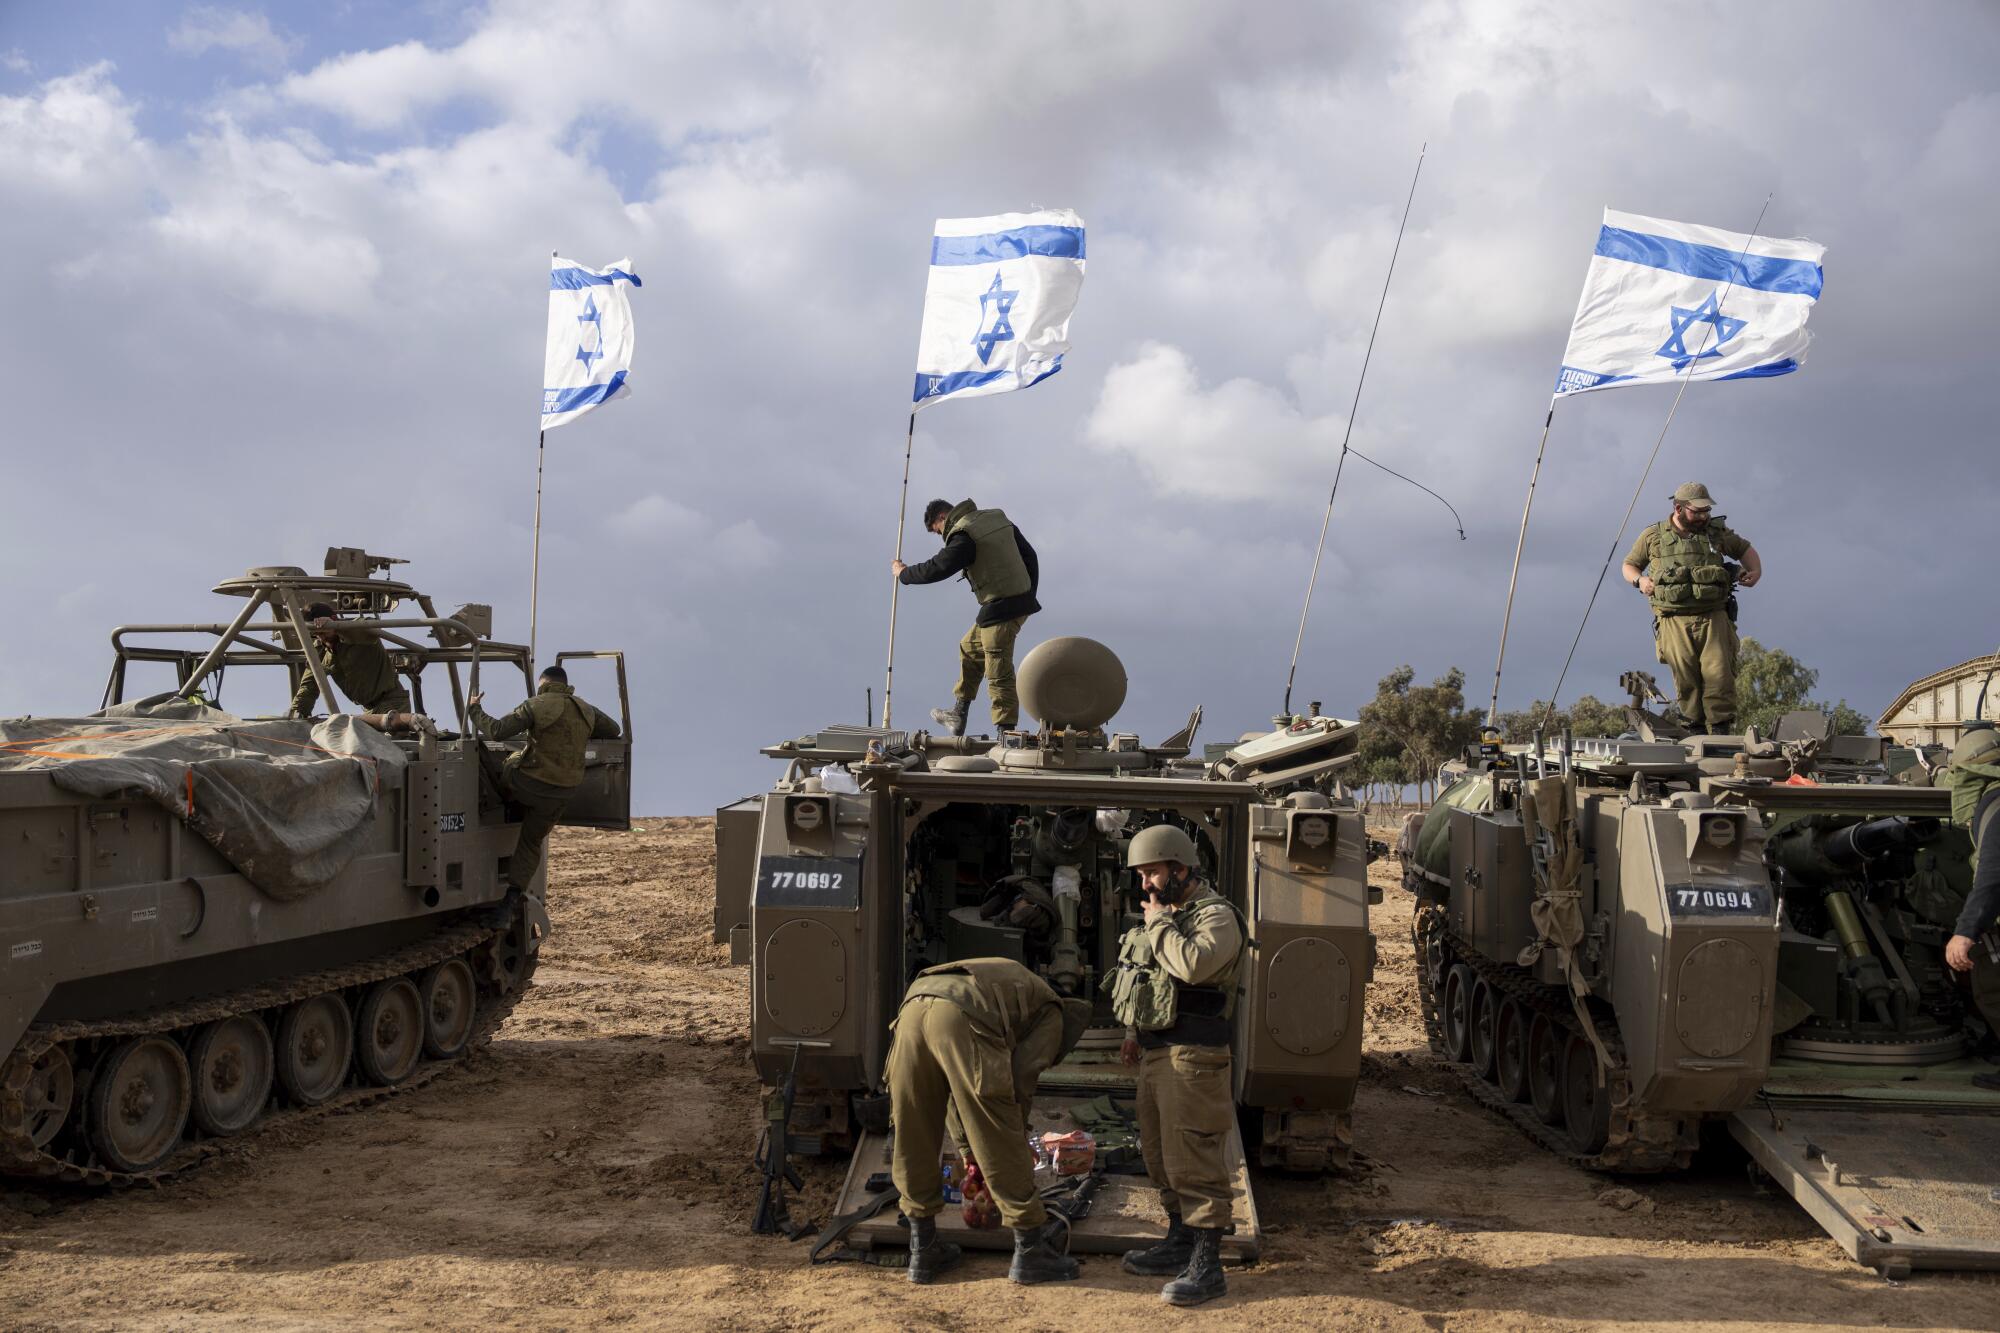 Israeli flags fly from several armored vehicles.